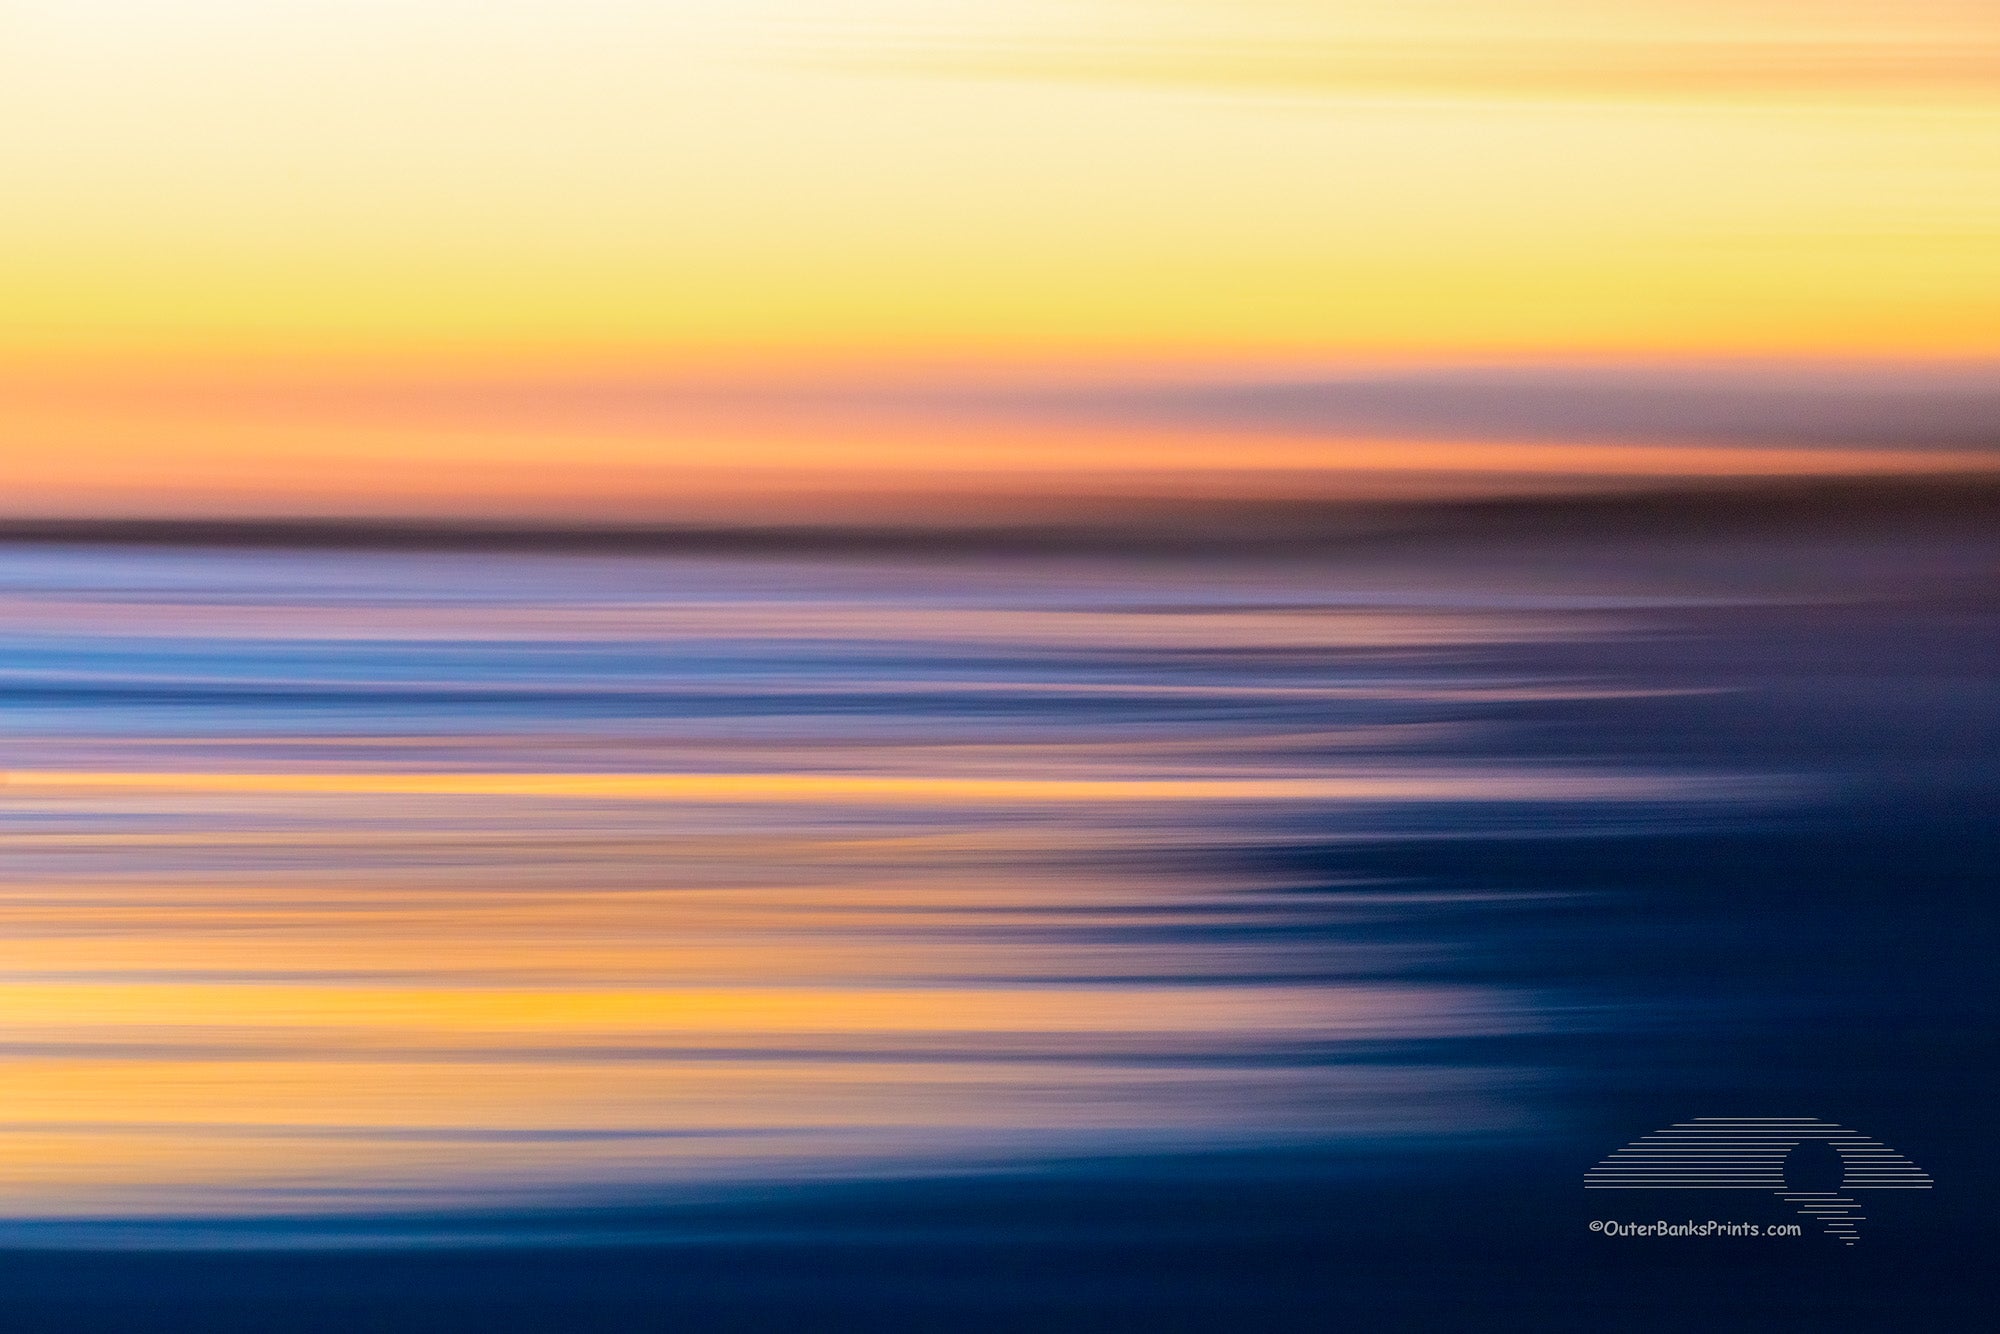 Intentional camera movement to create long streaks of light at sunset along Frisco beach in Cape Hatteras National Seashore, NC.